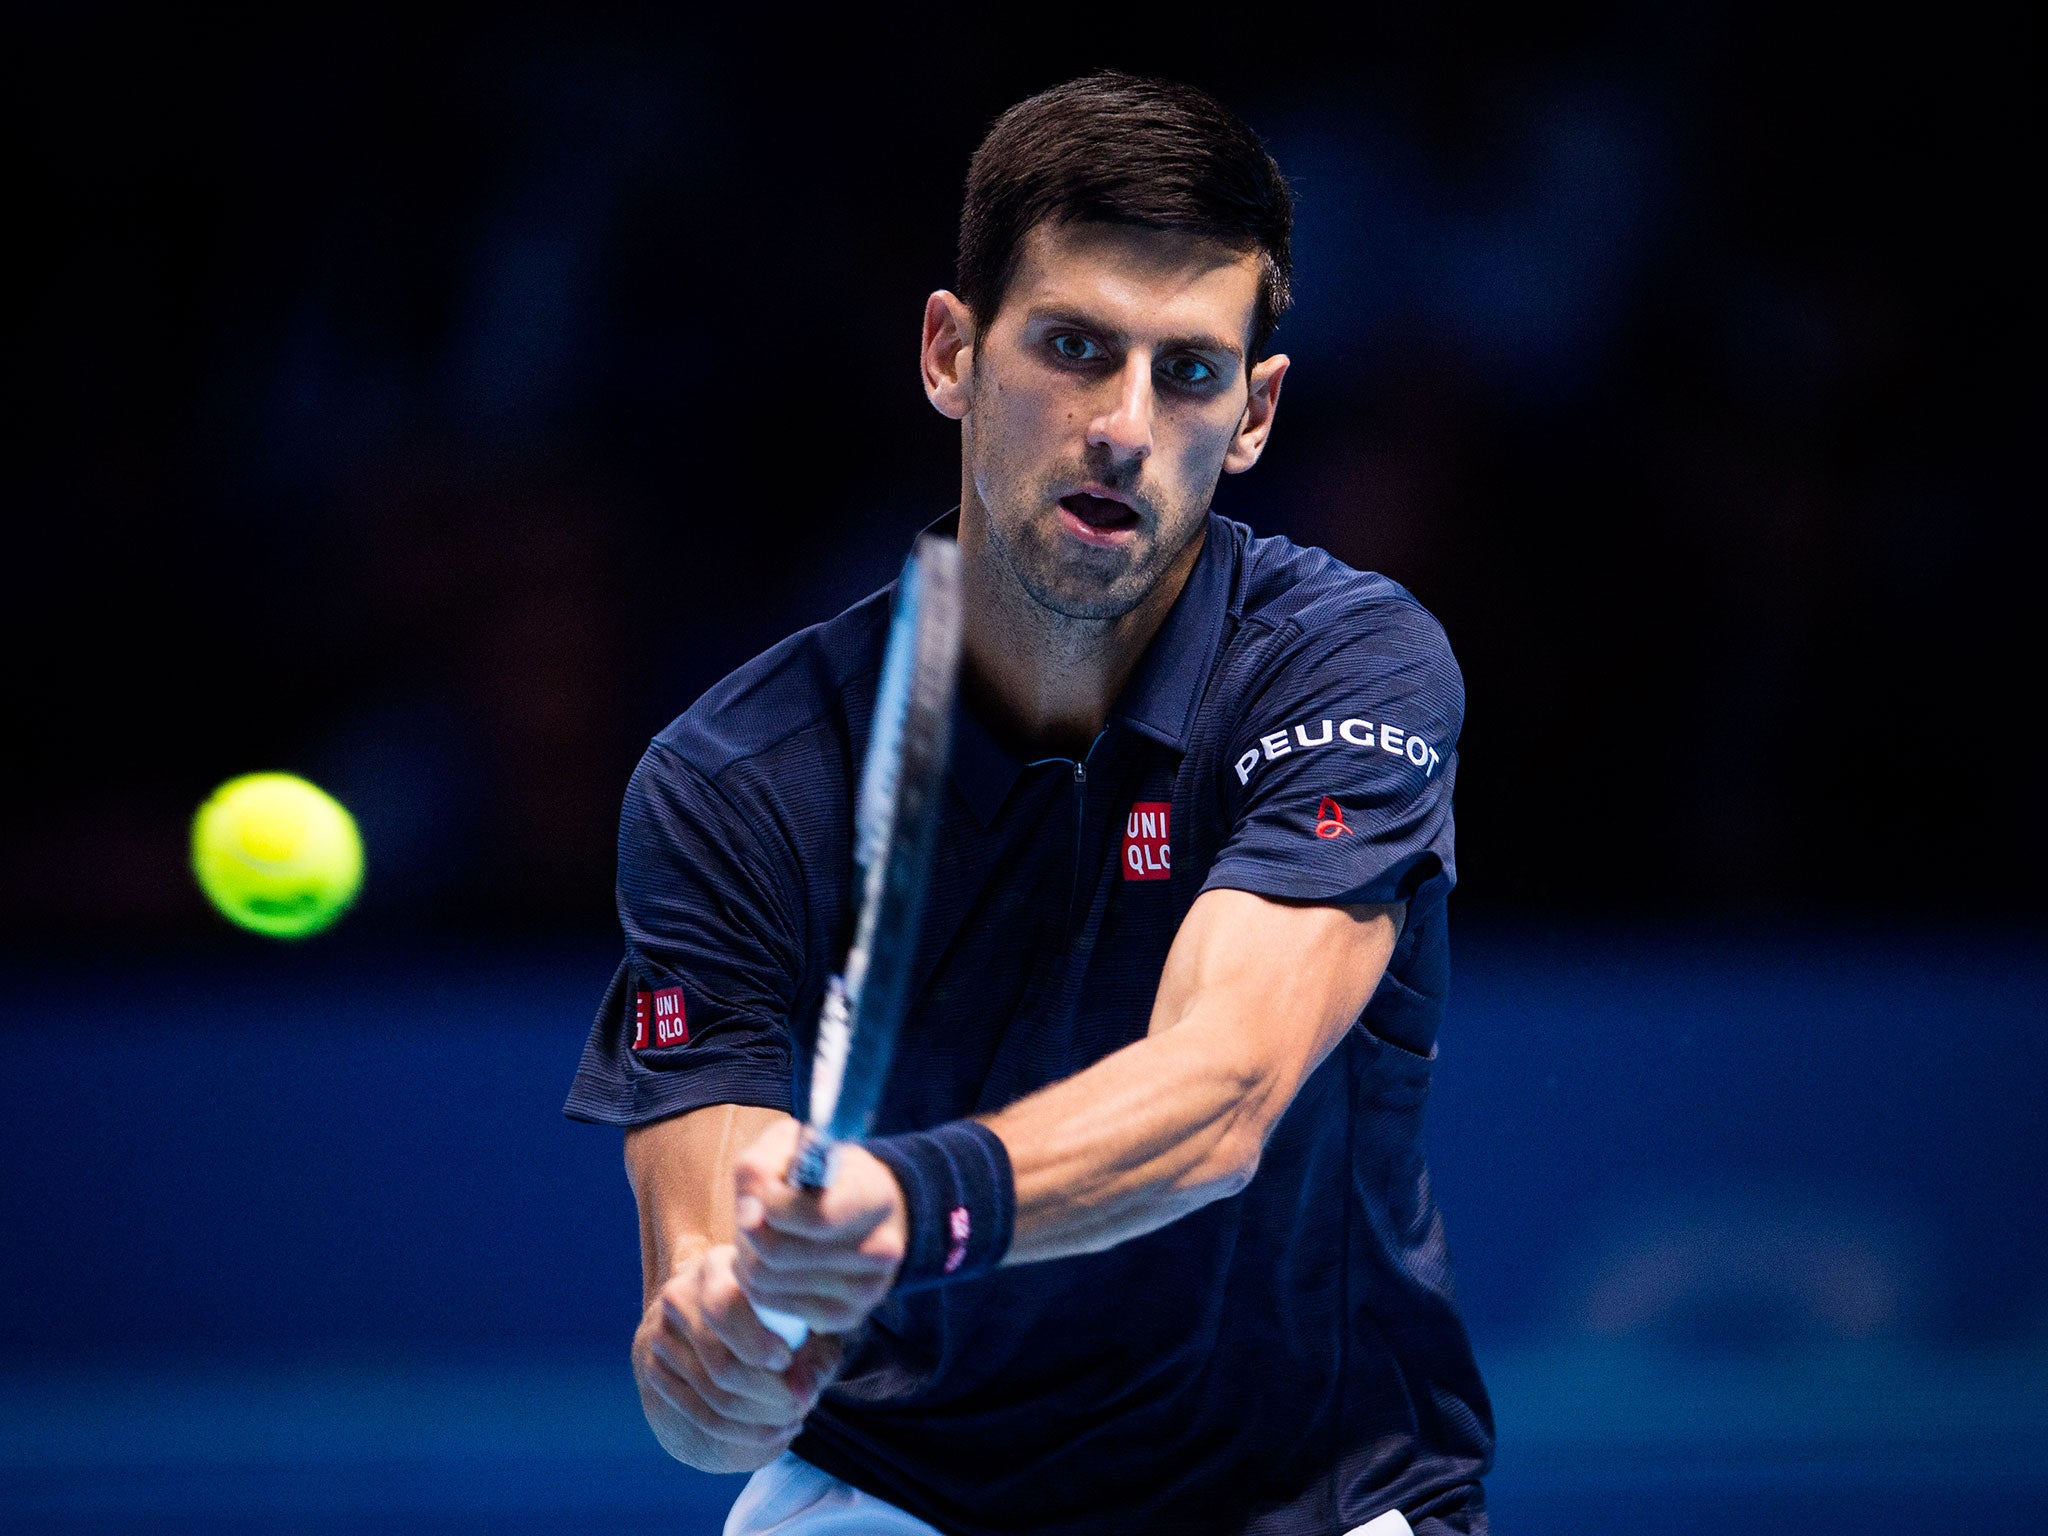 Djokovic had to battle hard to secure victory in London, and came dangerously close to conceding the second set